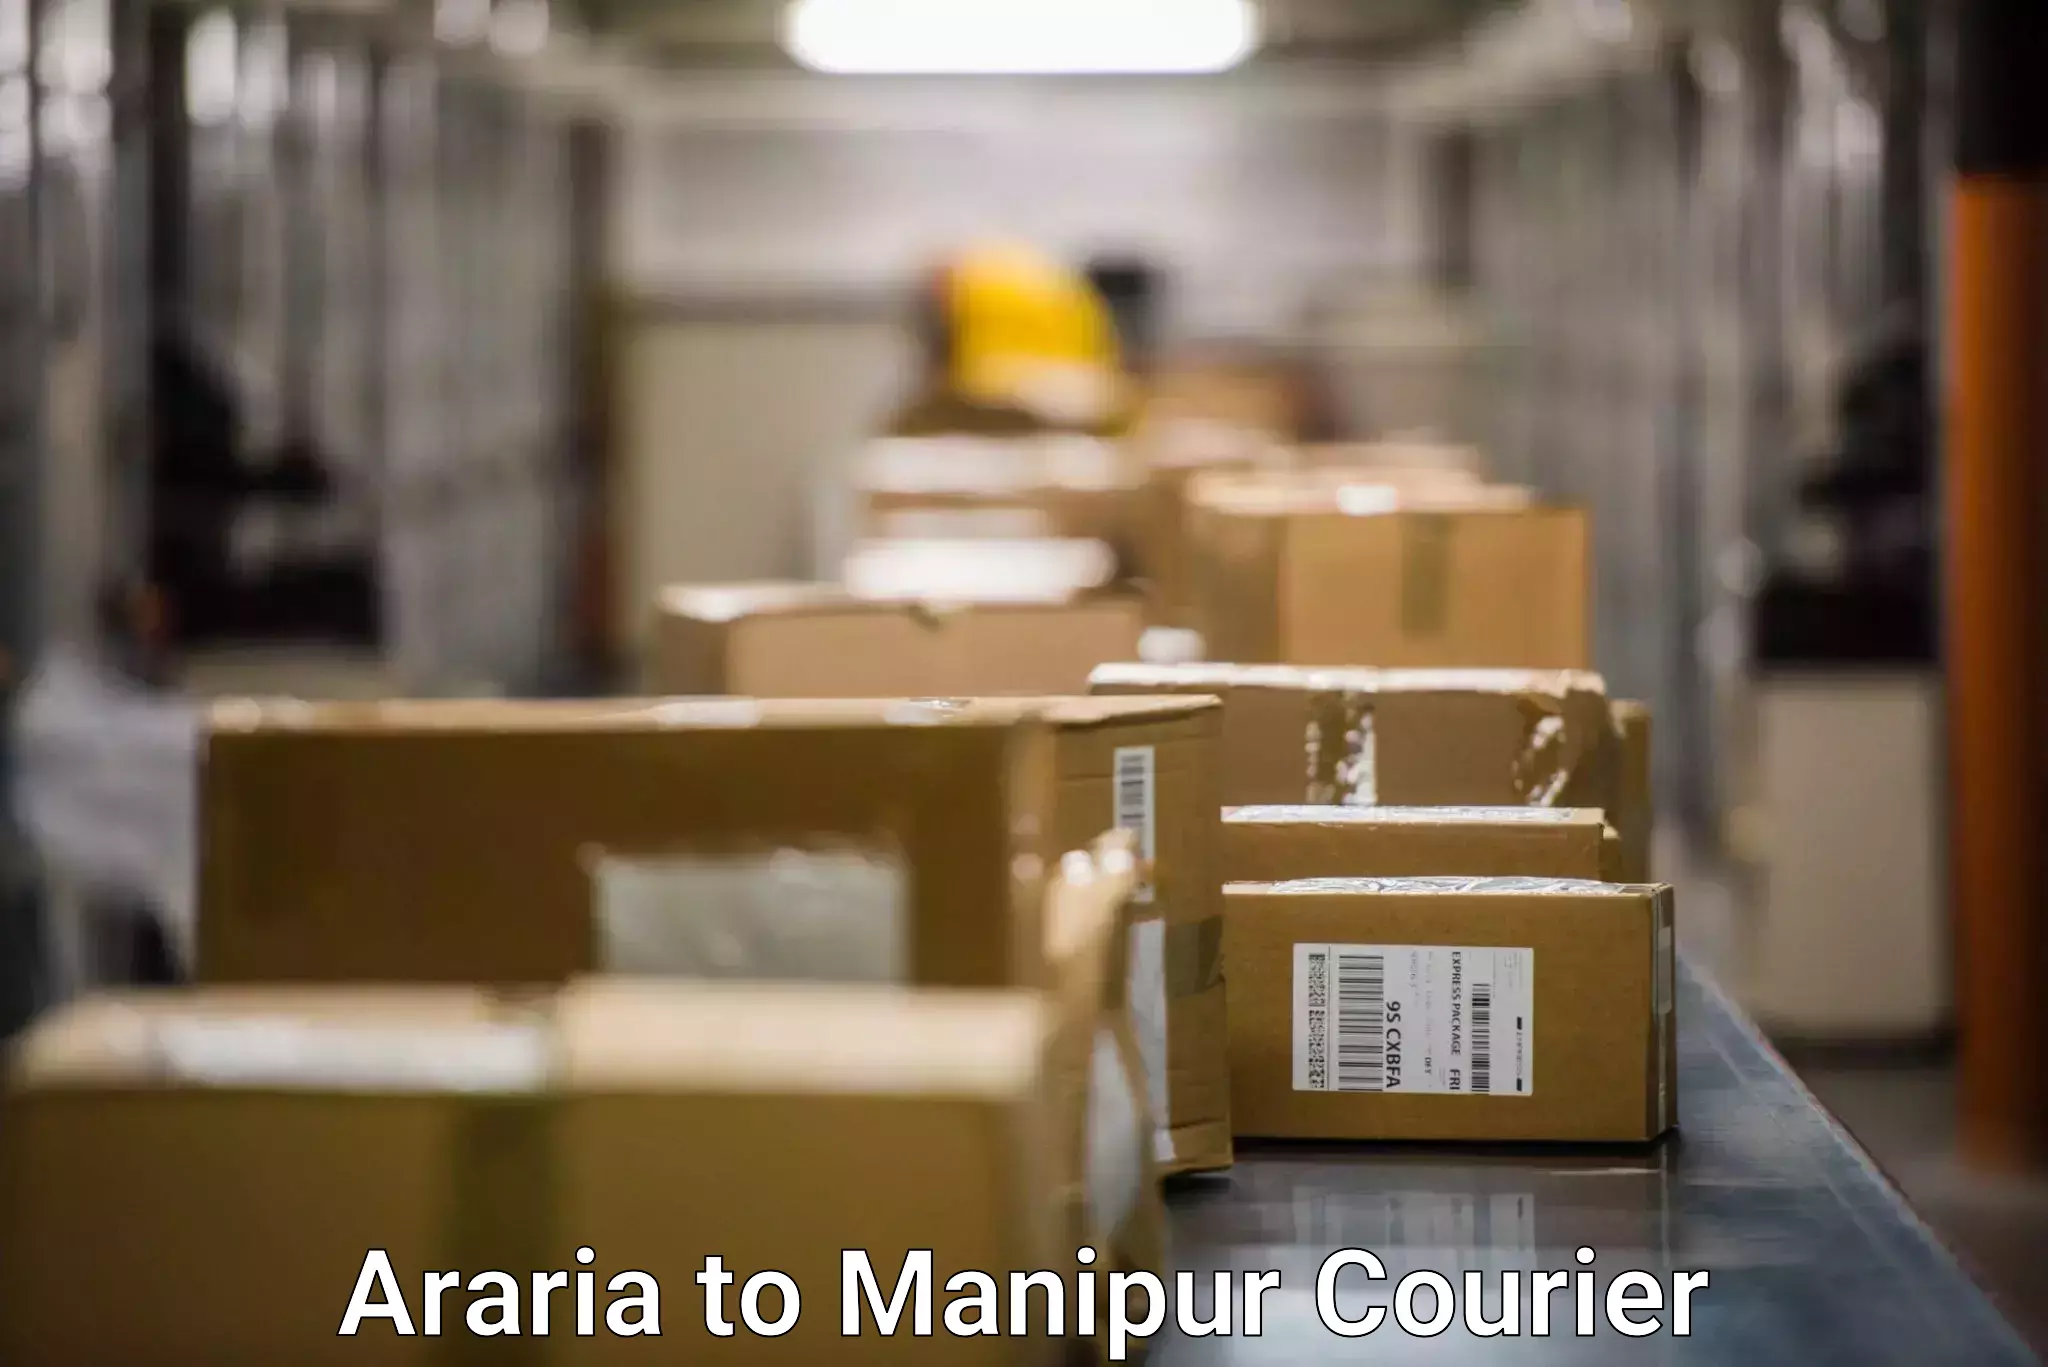 Affordable parcel service Araria to Manipur